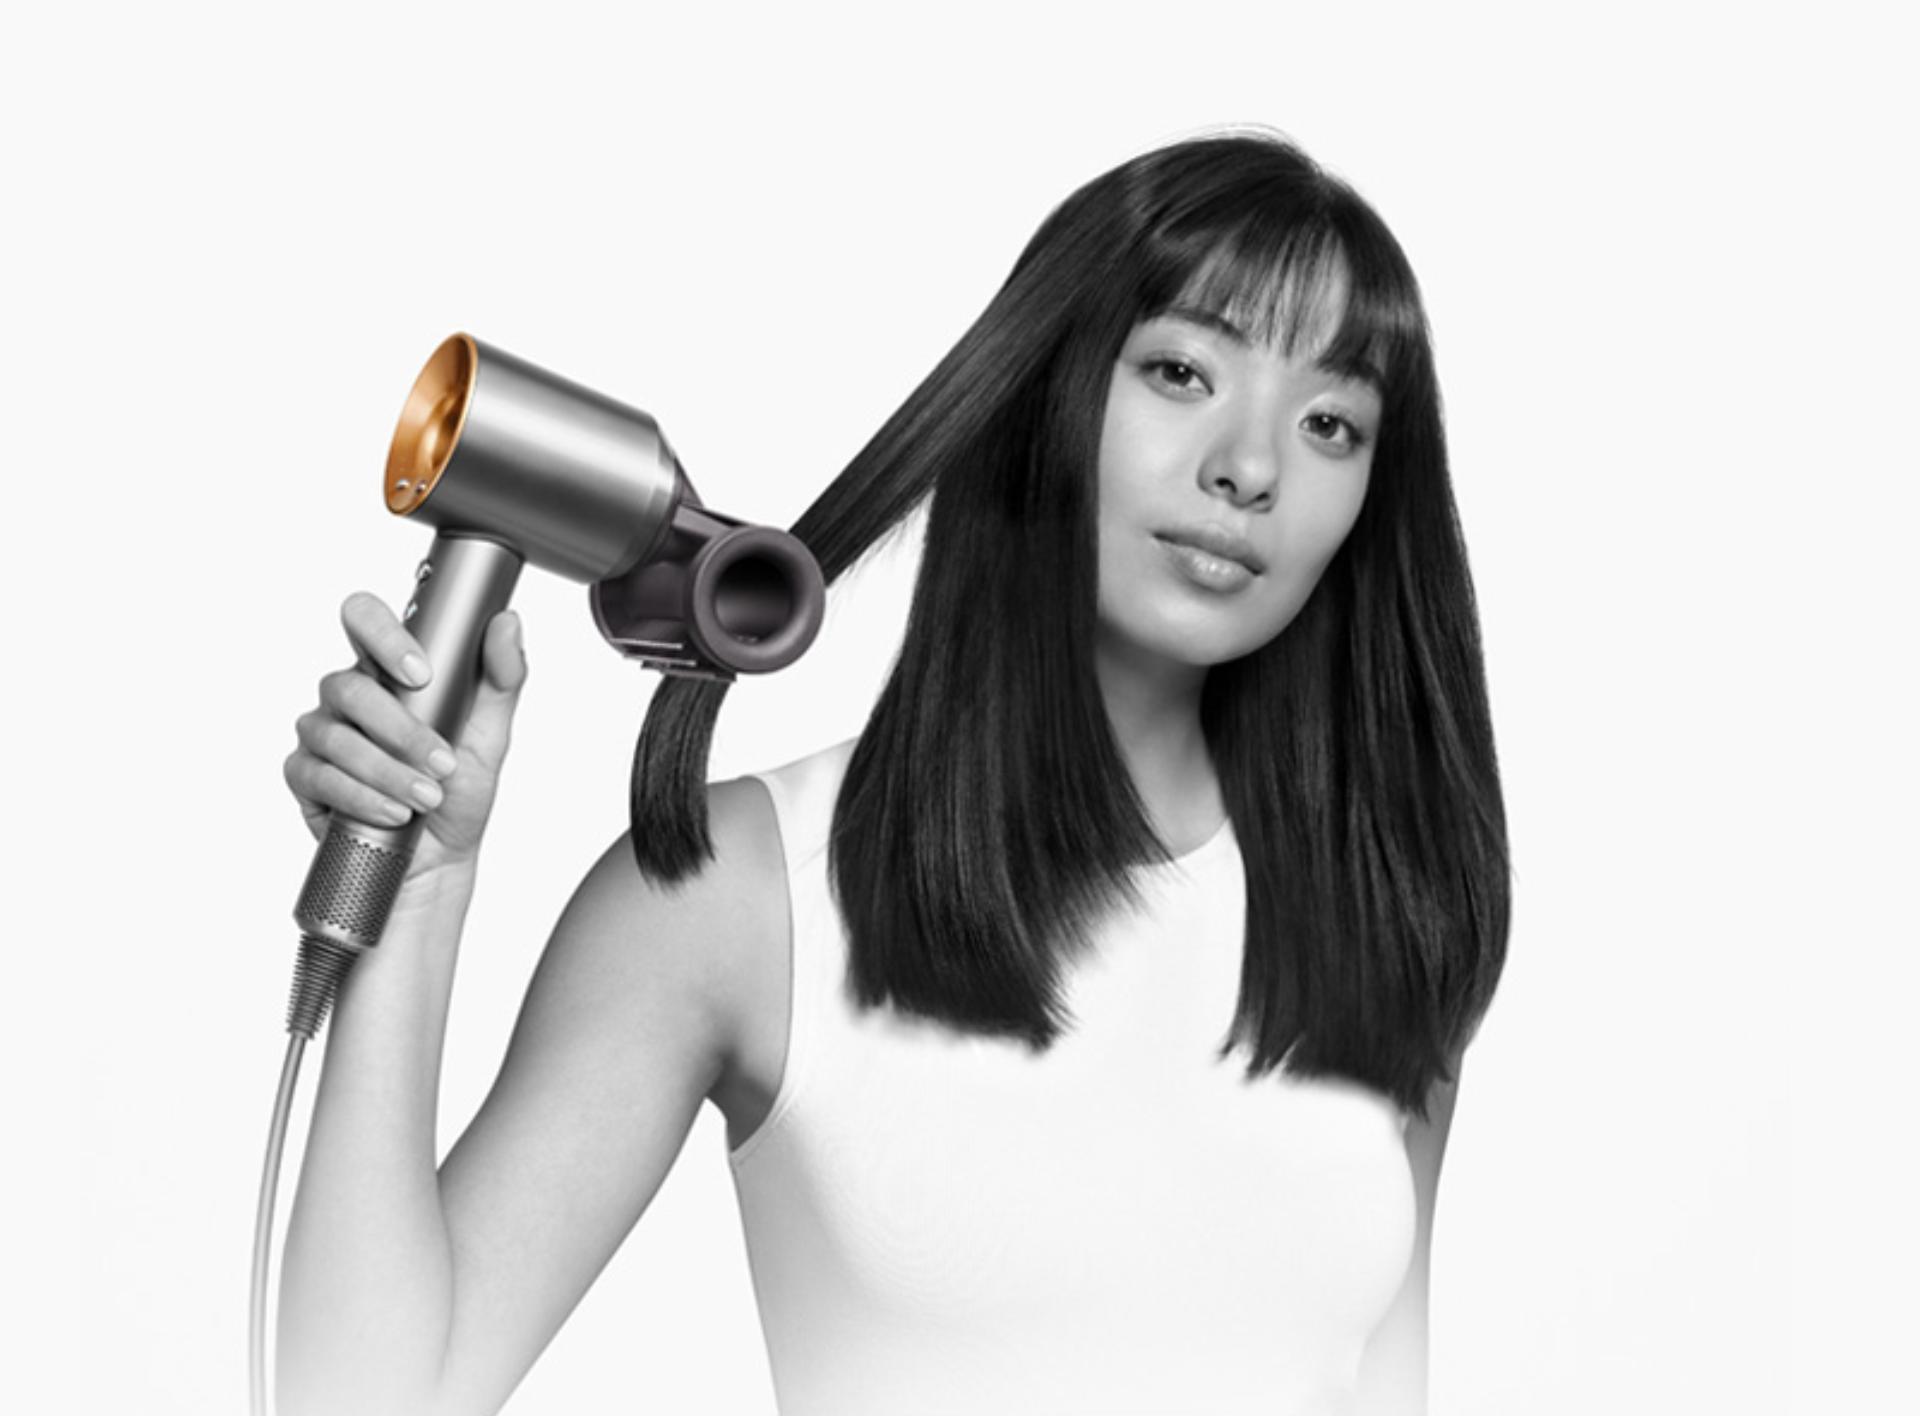 Model using the Dyson Supersonic hair dryer